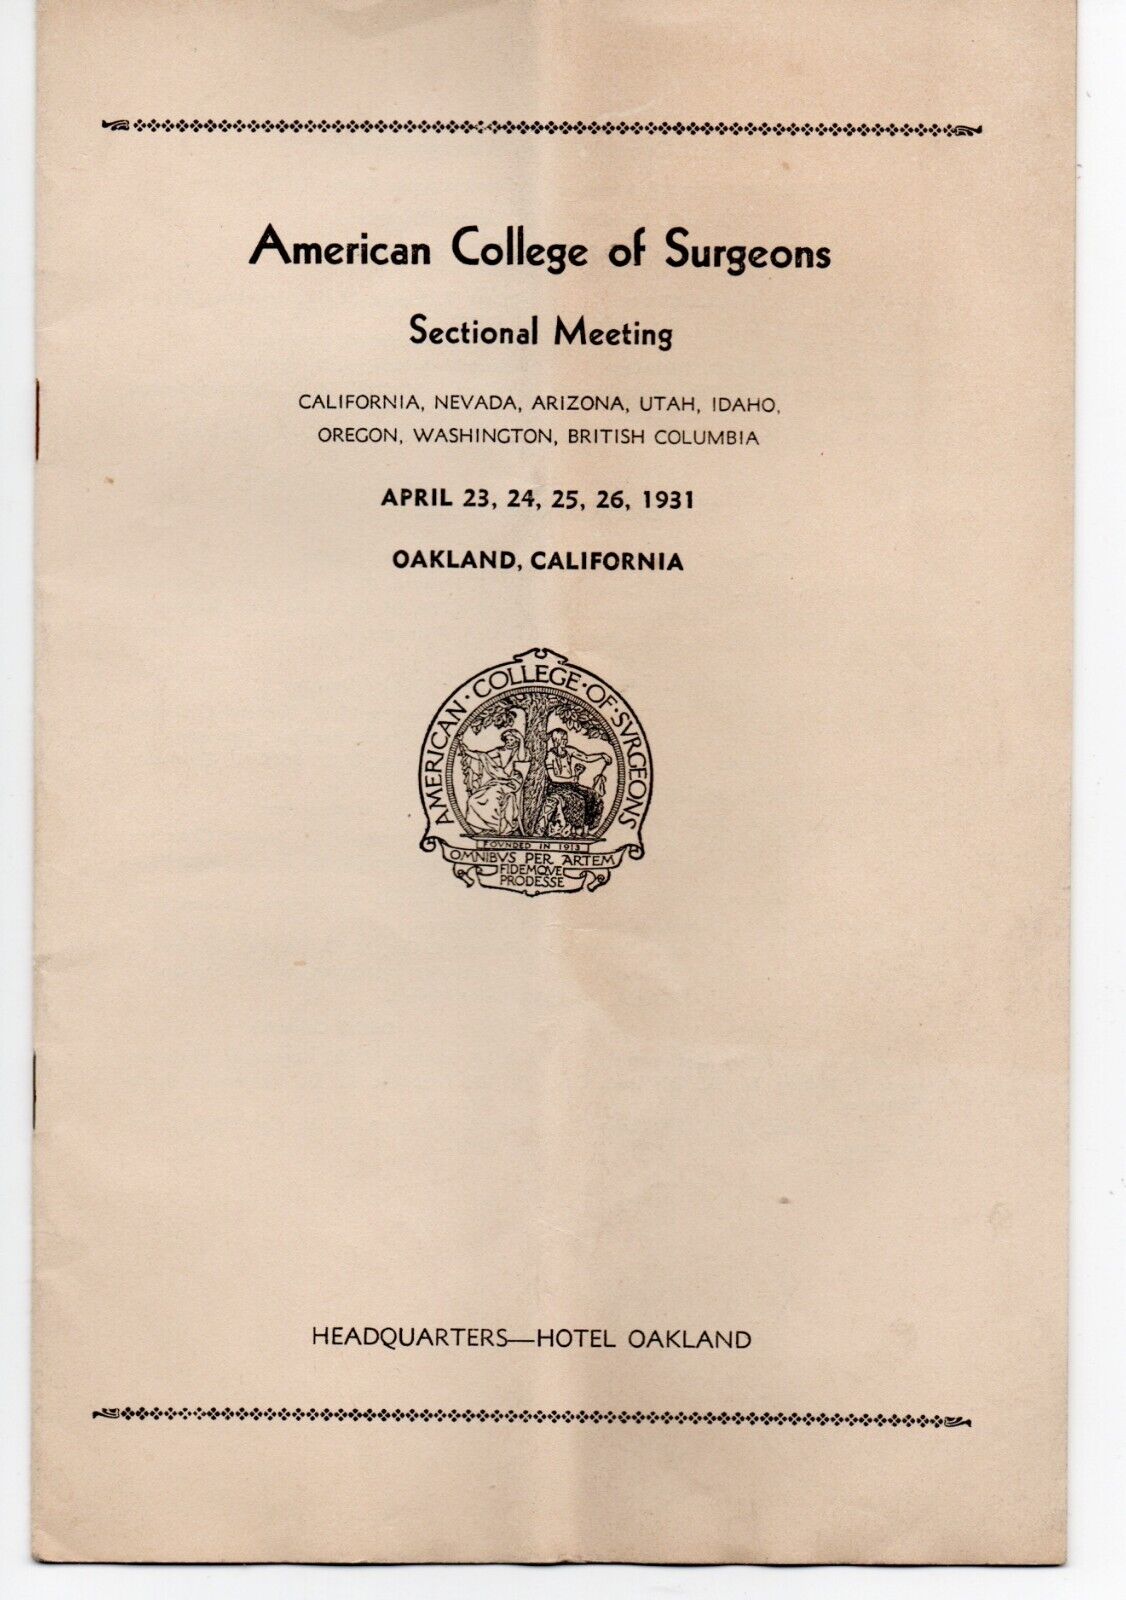 1931 Program from the American College of Surgeons Meeting at Oakland CA